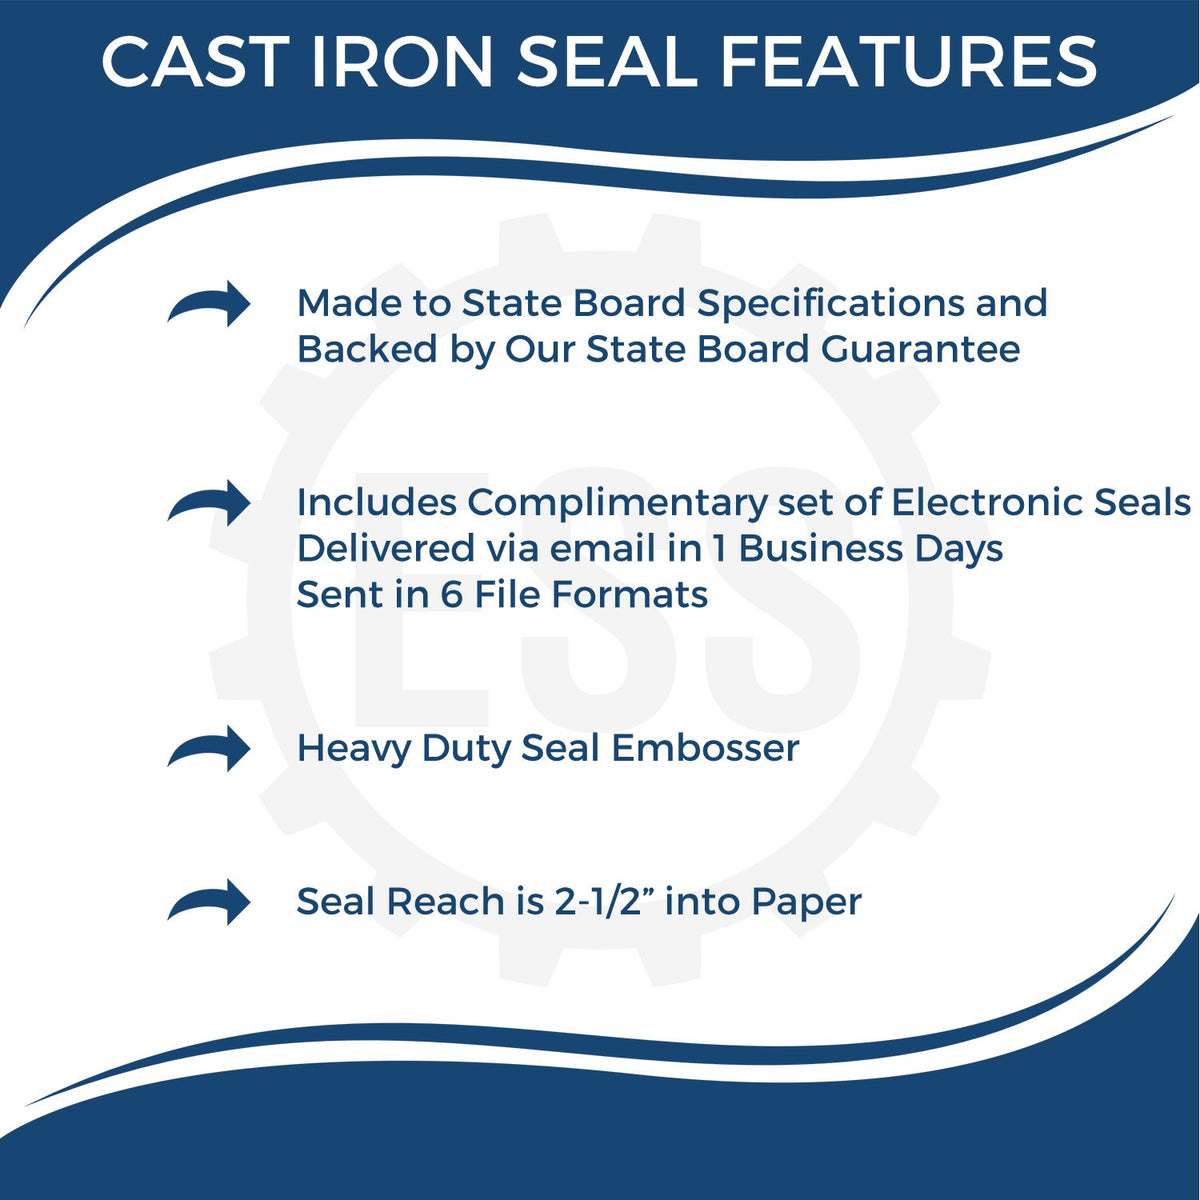 A picture of an infographic highlighting the selling points for the Heavy Duty Cast Iron Florida Engineer Seal Embosser